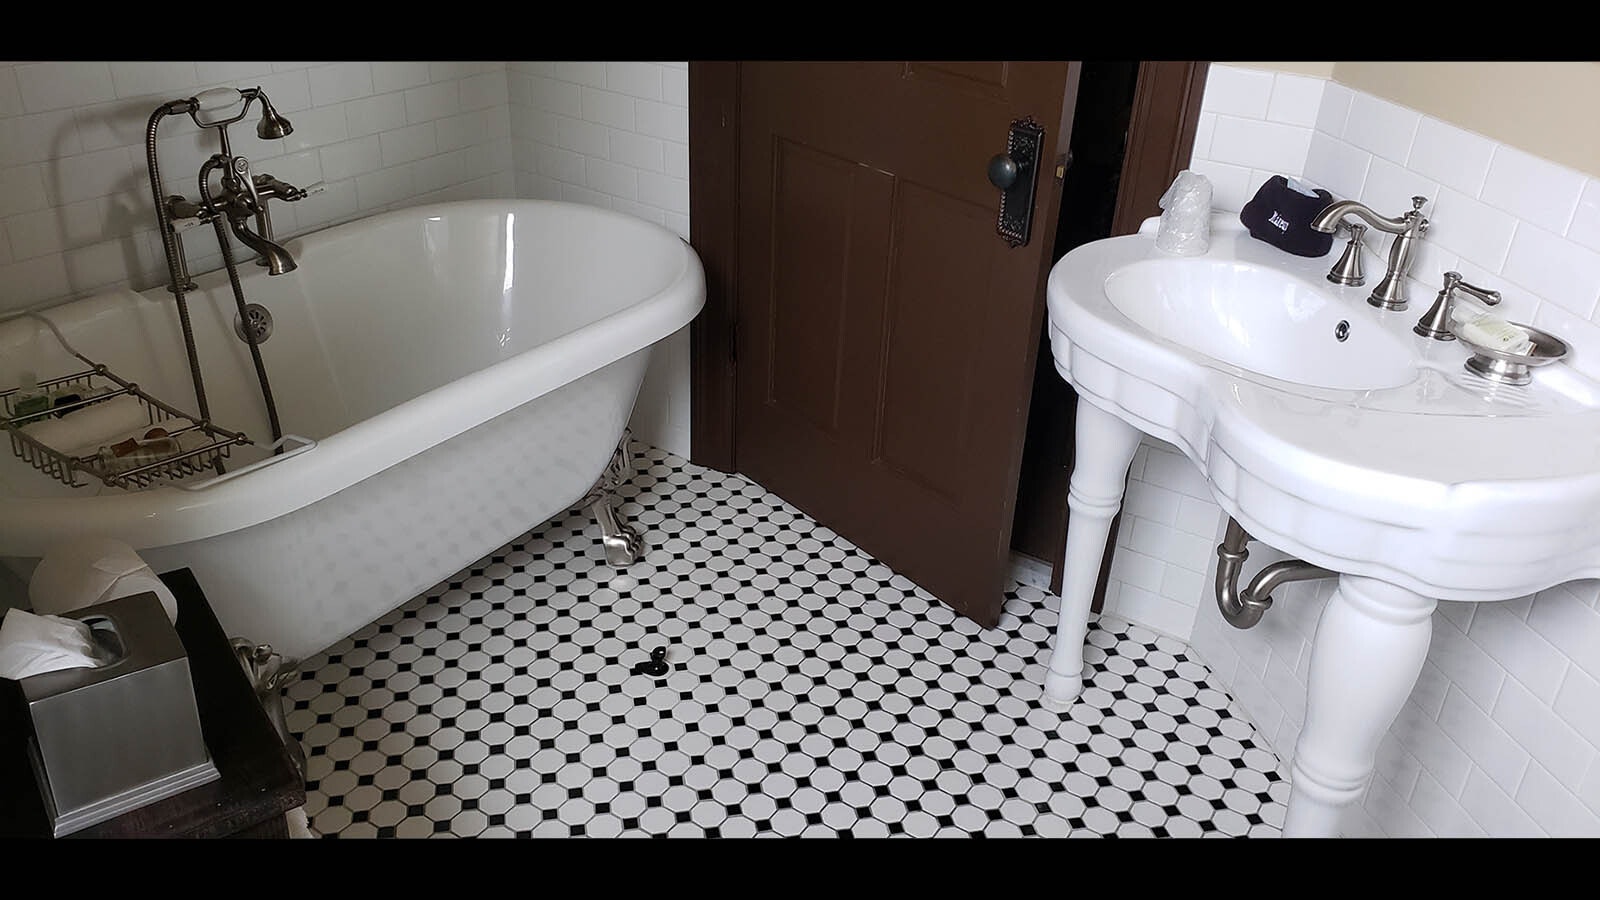 A clawfoot tub and porcelain sink are a nice touch, but still offer all the modern amenities today's travelers expect.